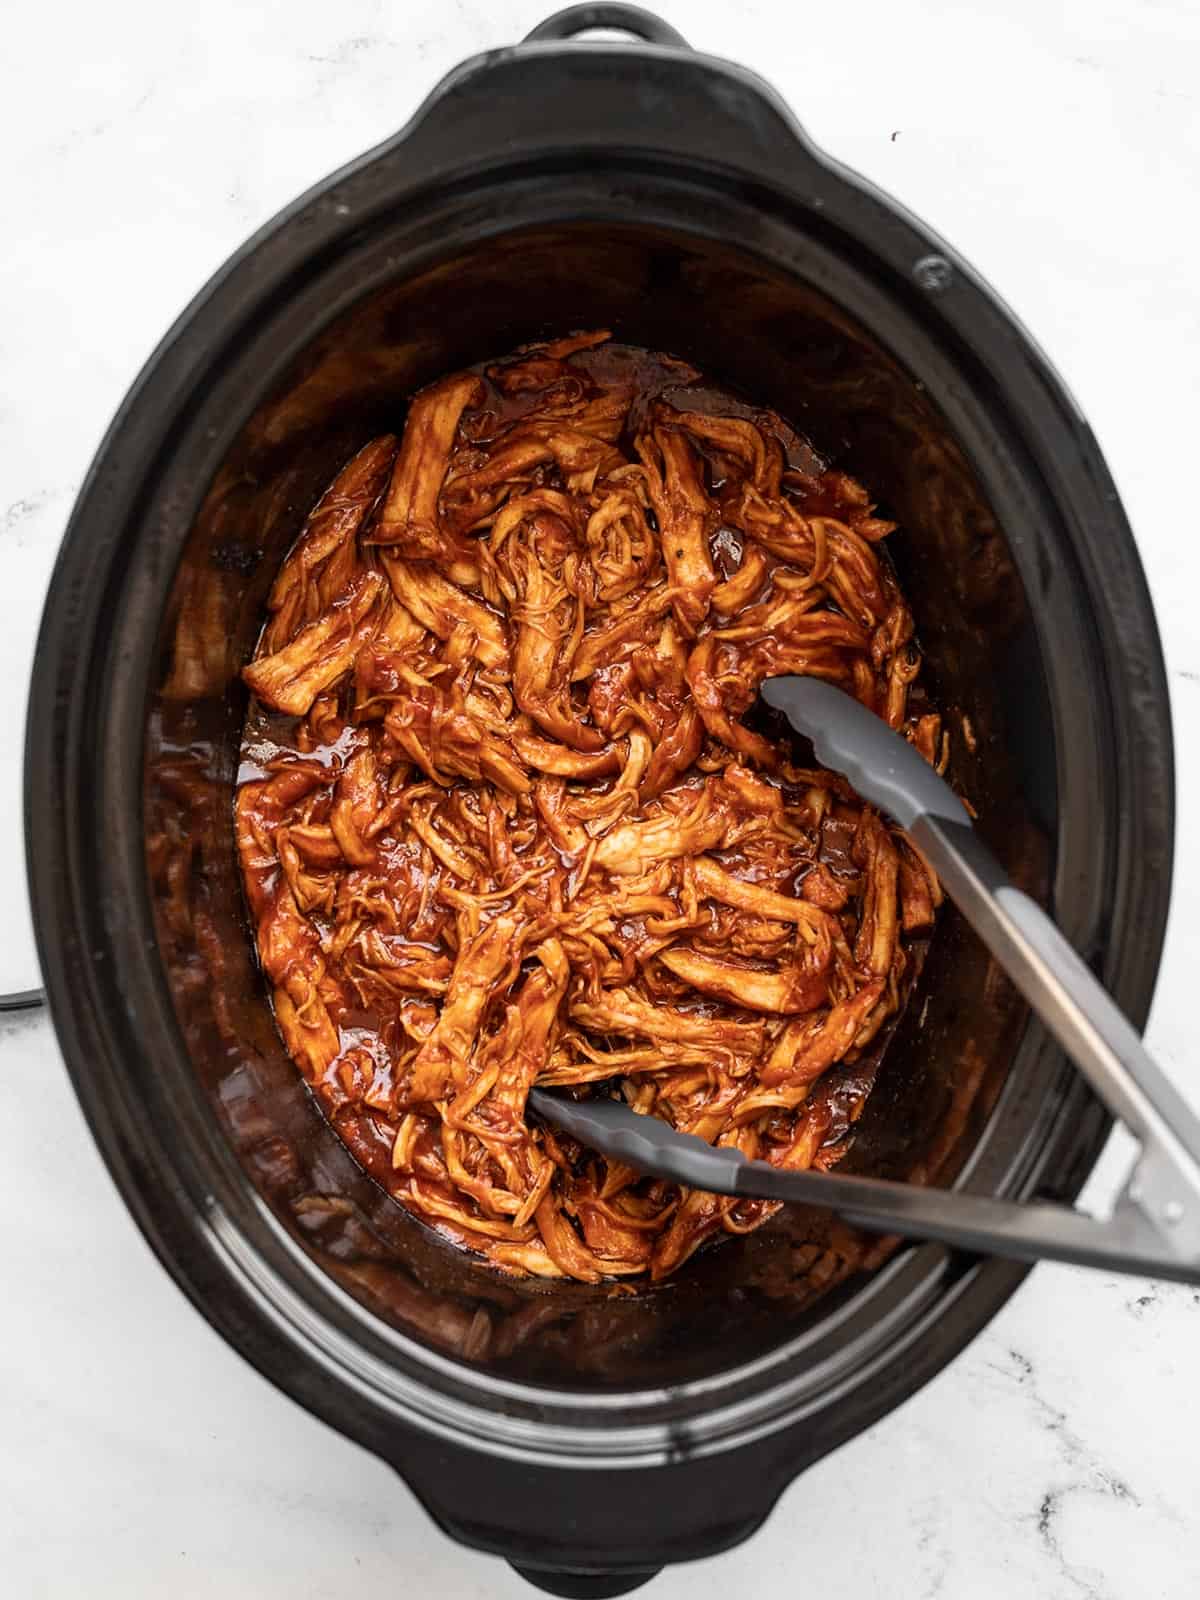 Overhead view of shredded BBQ chicken in a slow cooker with tongs.